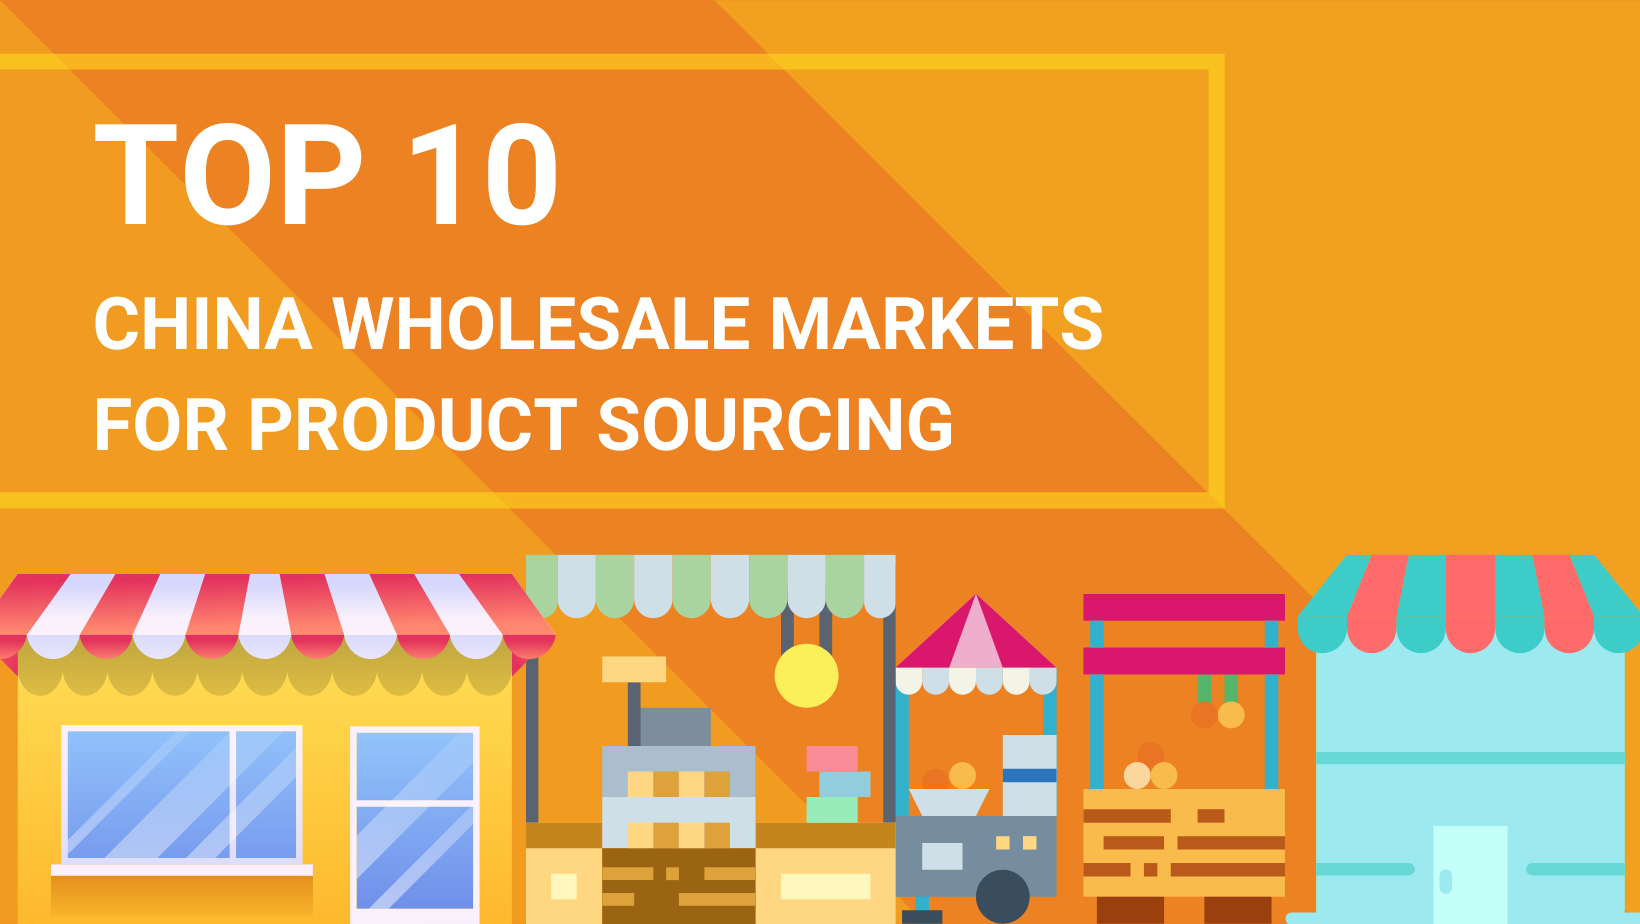 død kapitel narre Top 10 China Wholesale Markets for Product Sourcing (FAQs Included) -  Dropshipping From China | NicheDropshipping